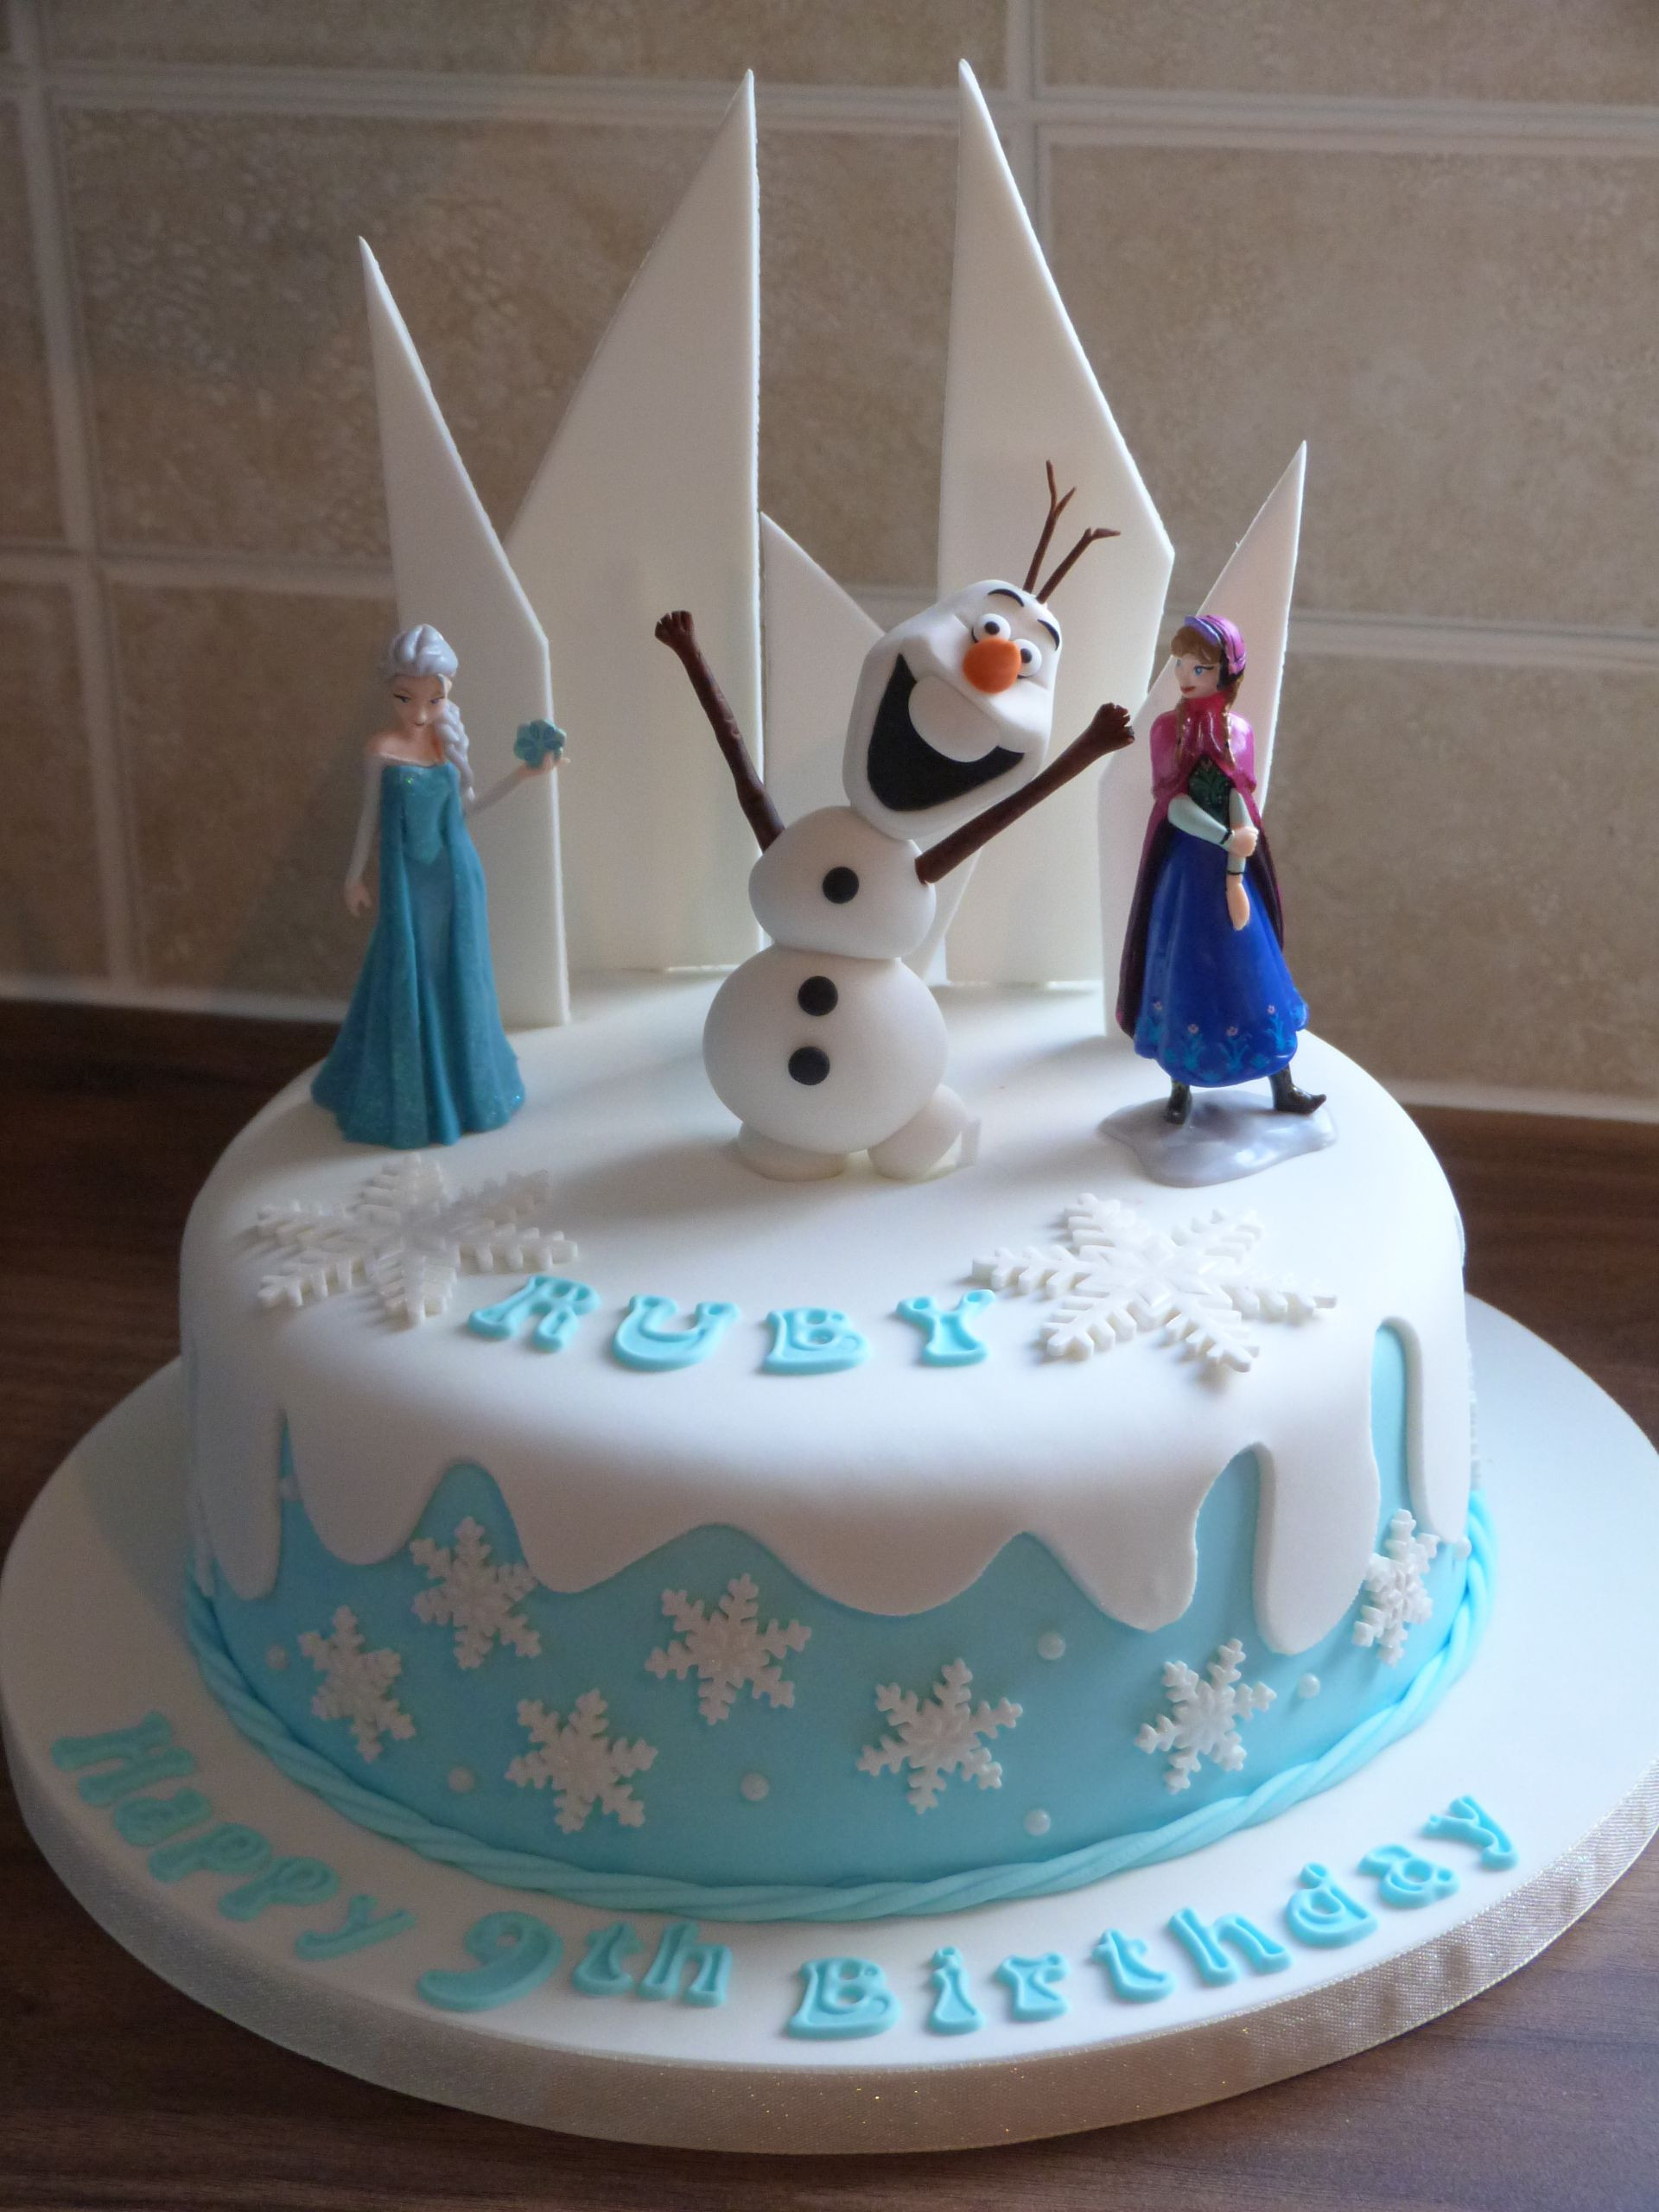 Frozen Birthday Cake Ideas
 Frozen themed cake with a hand made Olaf